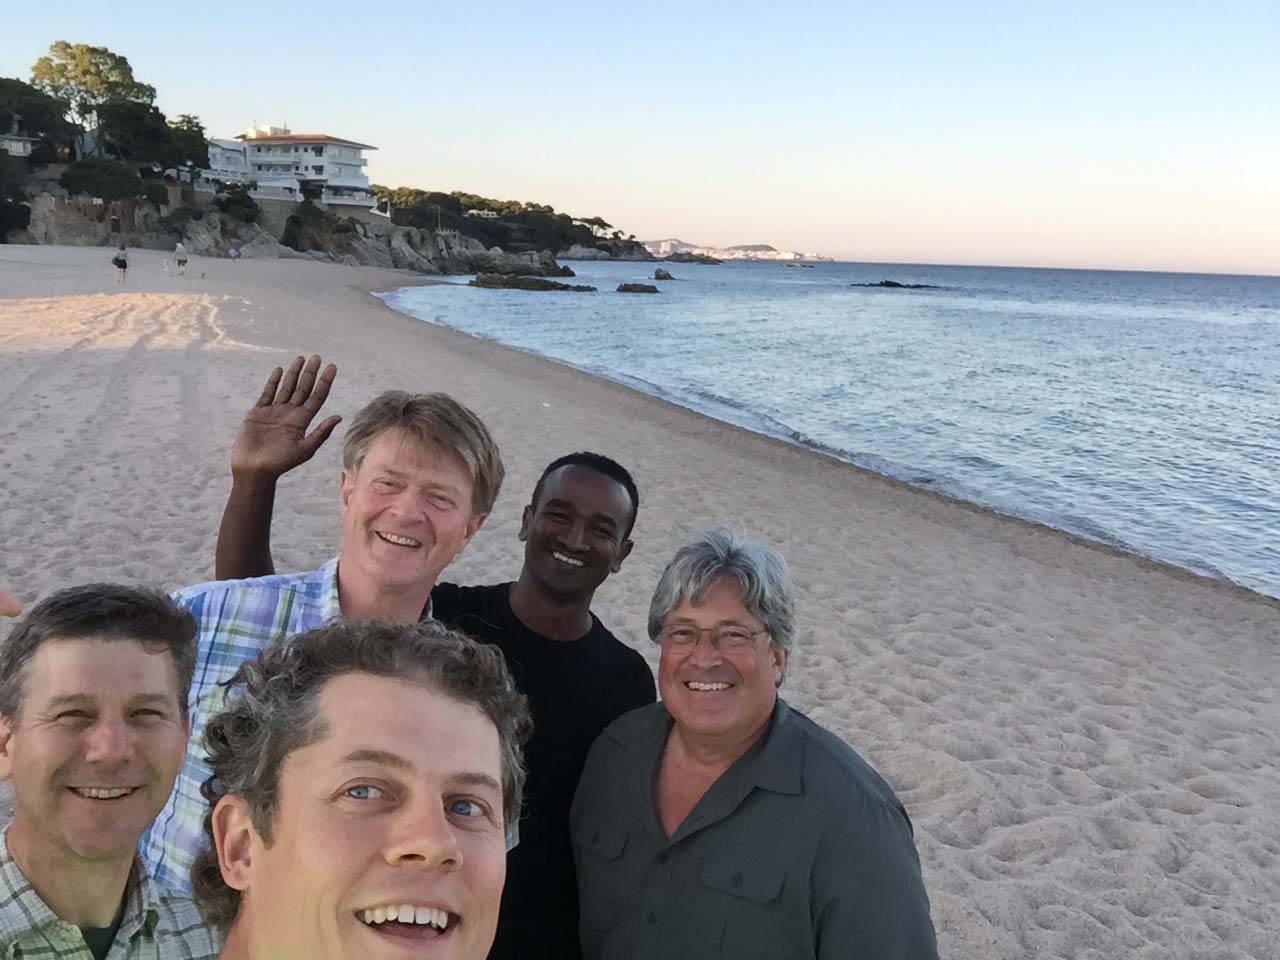 Matthew Chappell (front) traveled to Spain with several U.S. colleagues to learn the “eFoodPrint” software. (L-R) are Andrew Ristvey, John Lea-Cox, and Bruk Belema, all from the University of Maryland, and Tom Fernandez, from Michigan State University.